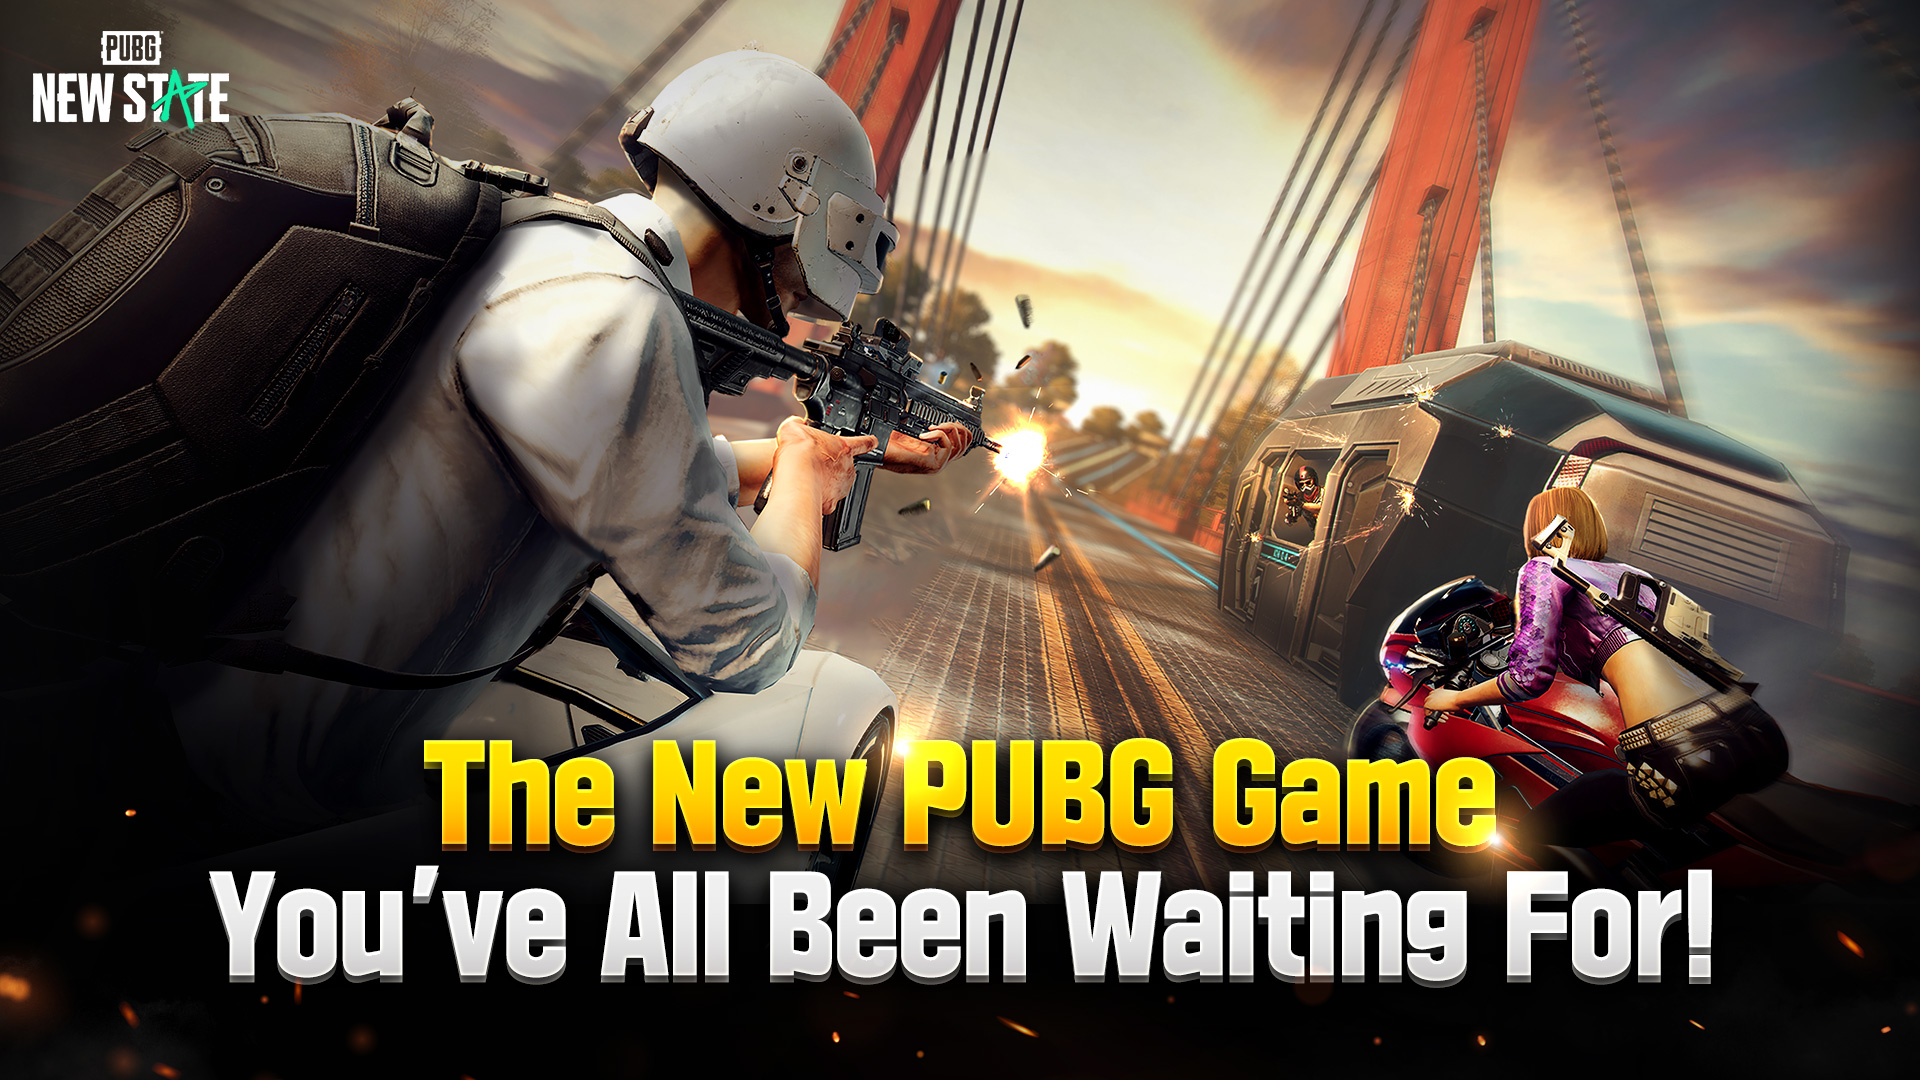 pubg new state download - pubg new state Game Review - Knowledge World